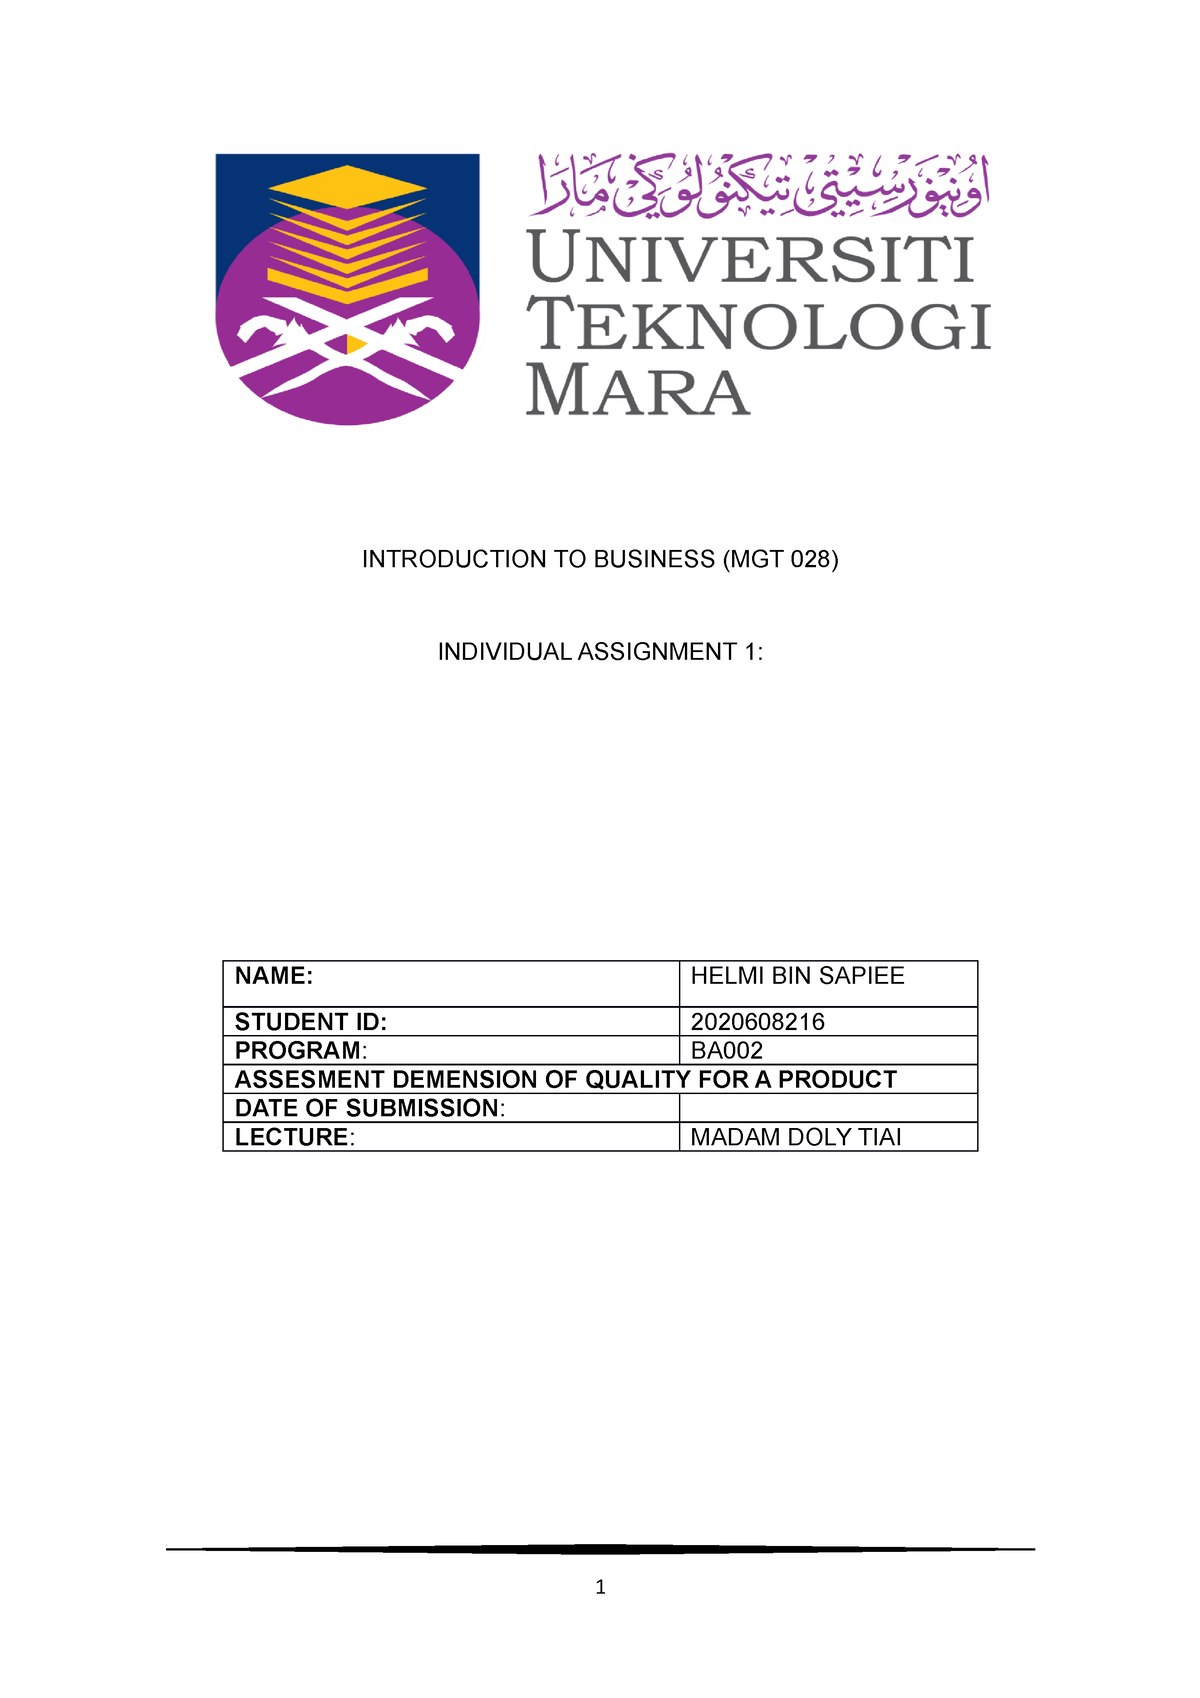 individual assignment mgt 028